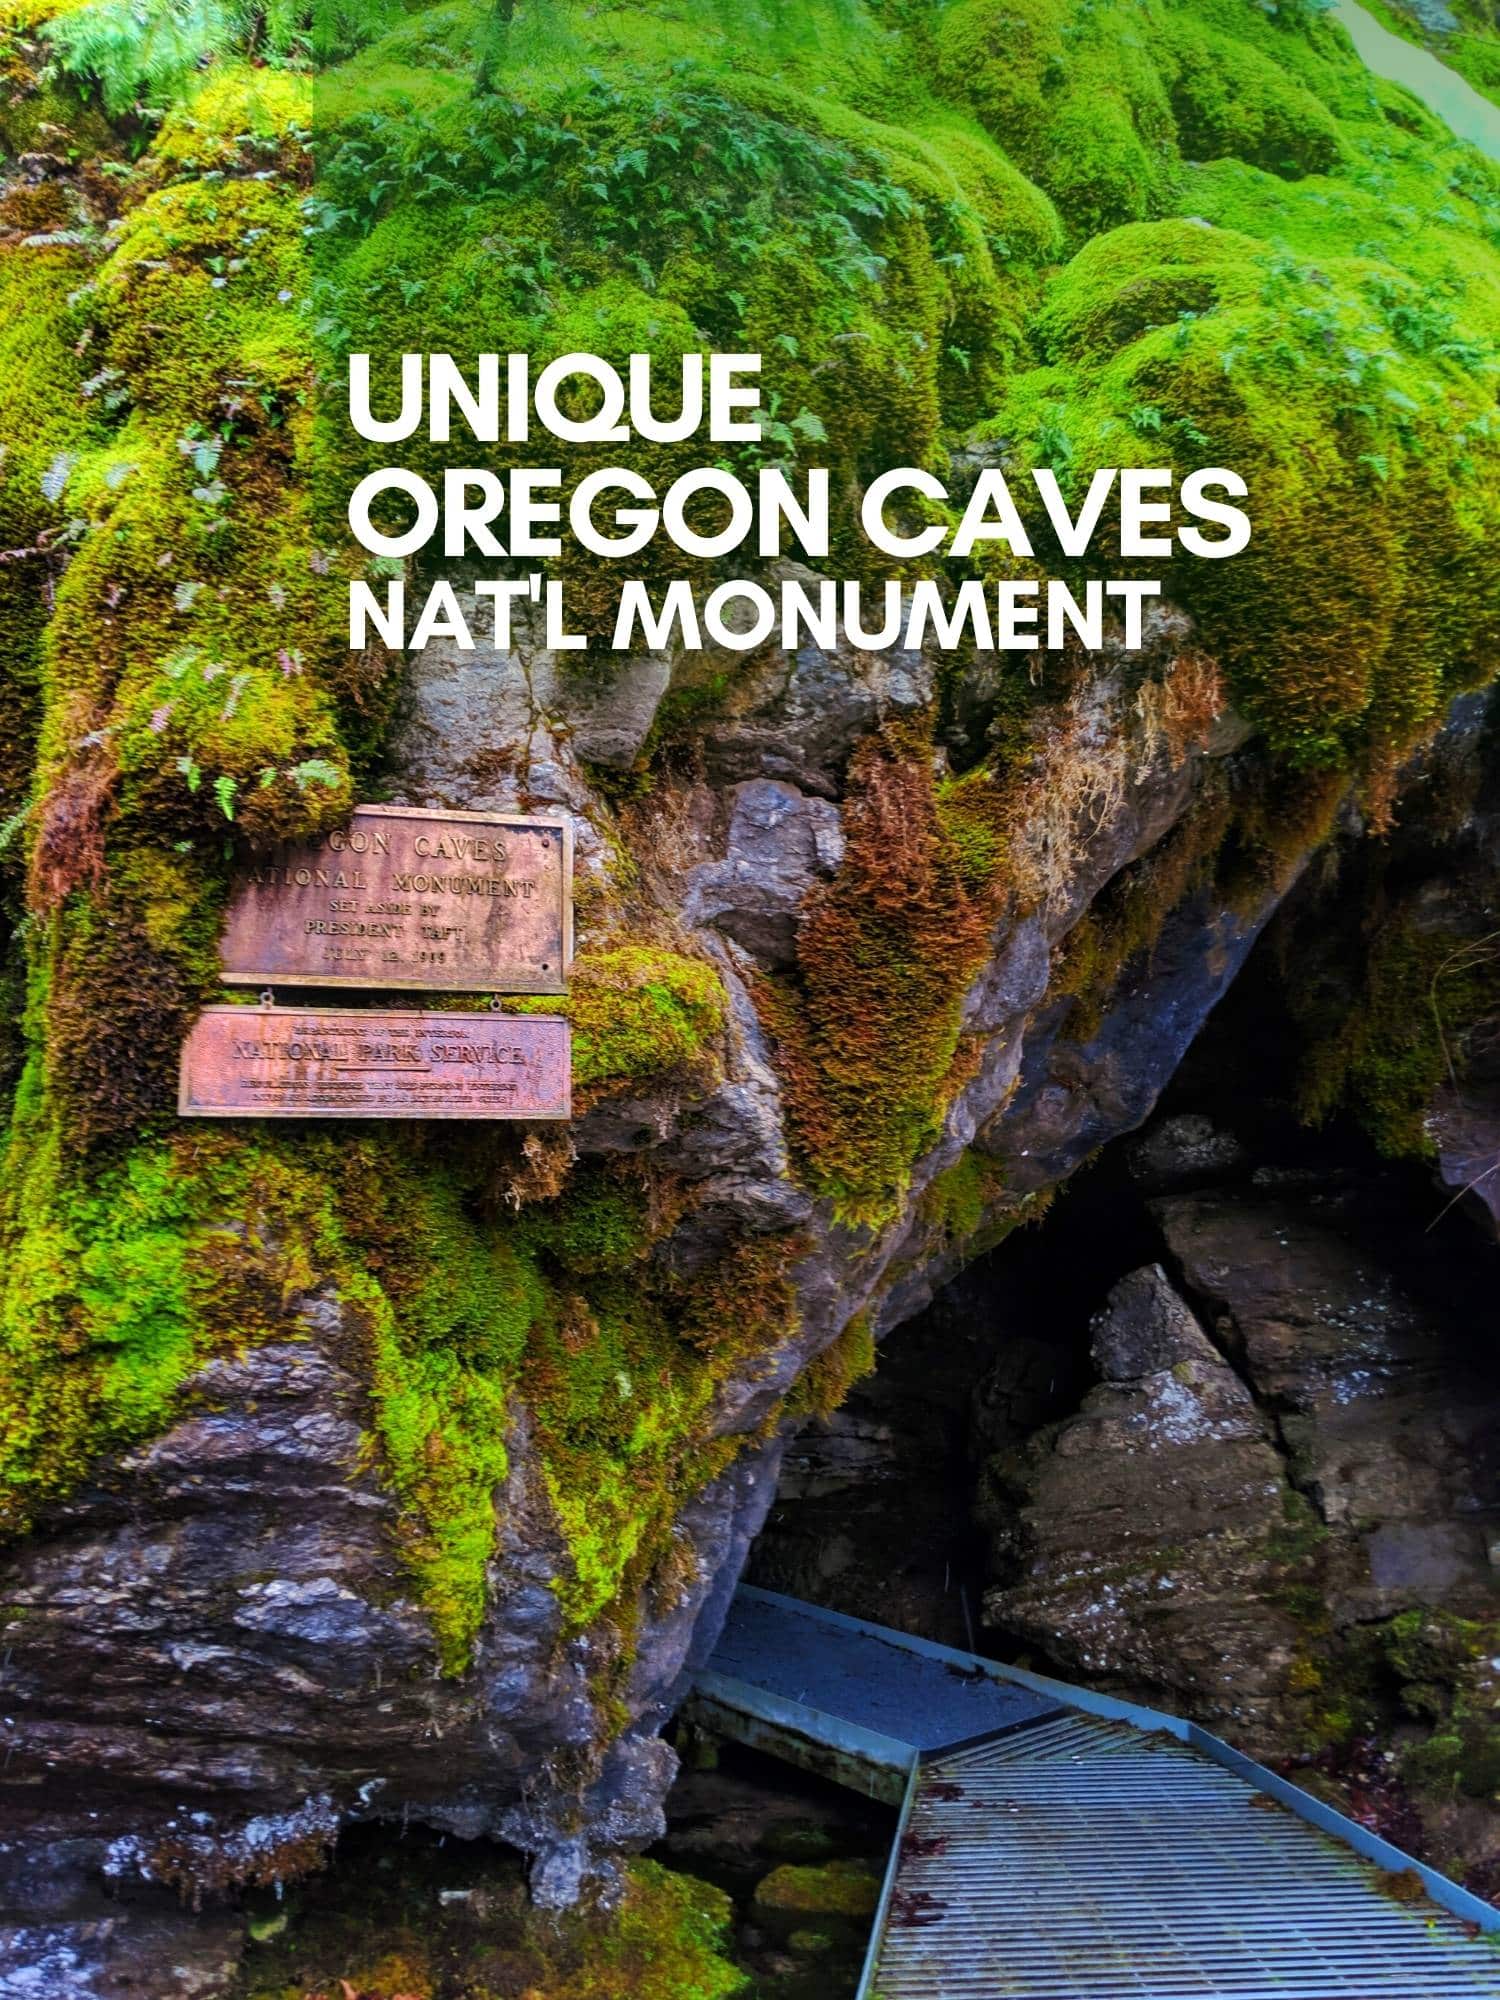 Everything you need to know to visit Oregon Caves National Monument, including cave tours, hiking trails and details of the Oregon Caves Chateau. Cave Junction, OR is worth the drive for this fascinating road trip stop!